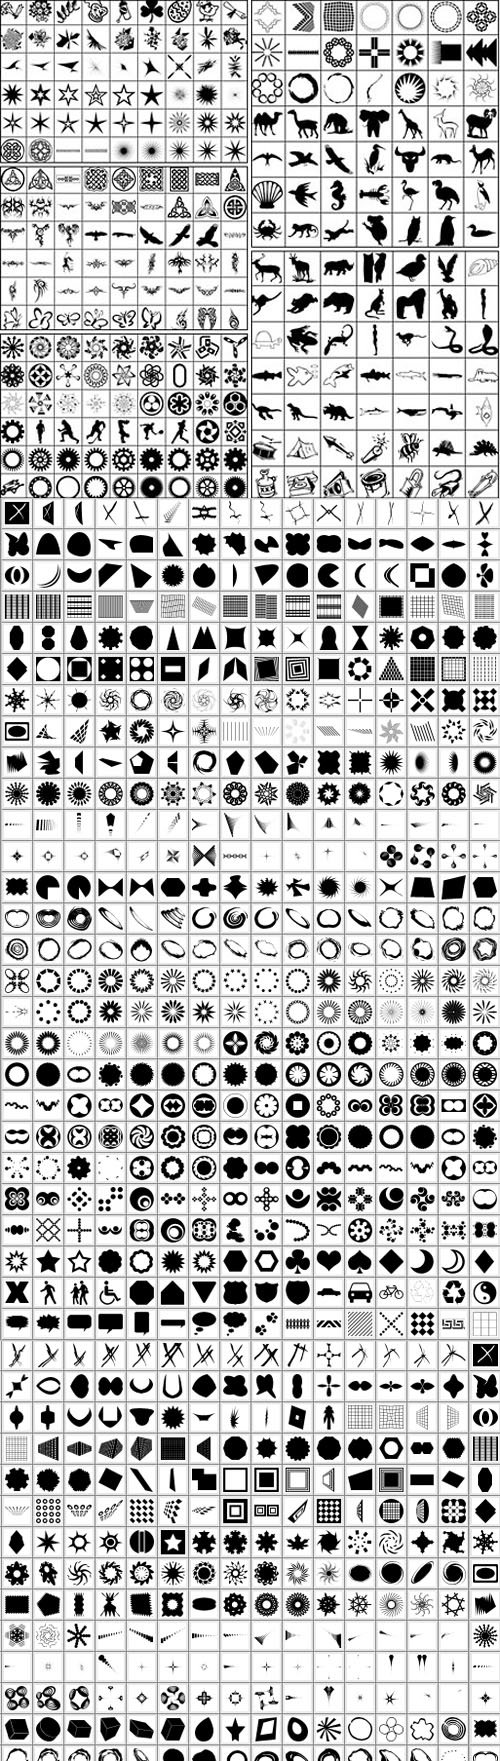 1000+ Awesome Shapes Pack for Photoshop